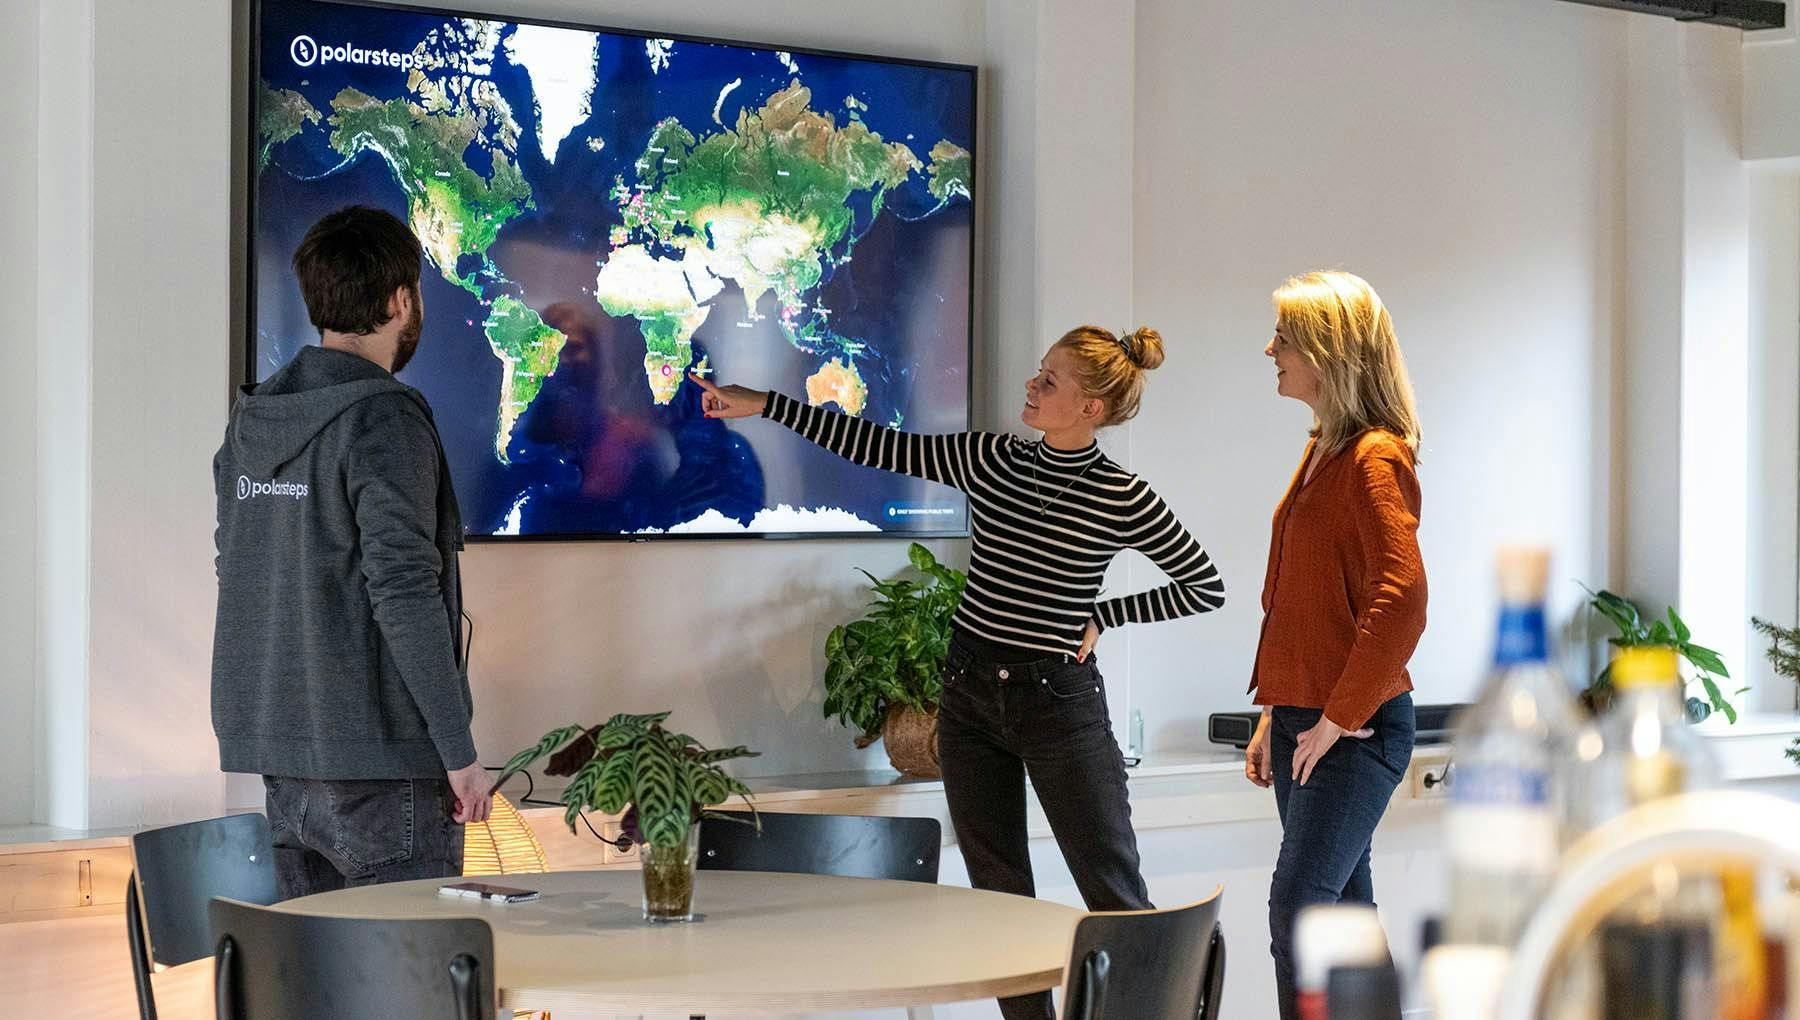 Polarsteps employees in their office pointing at a screen showing a world map.